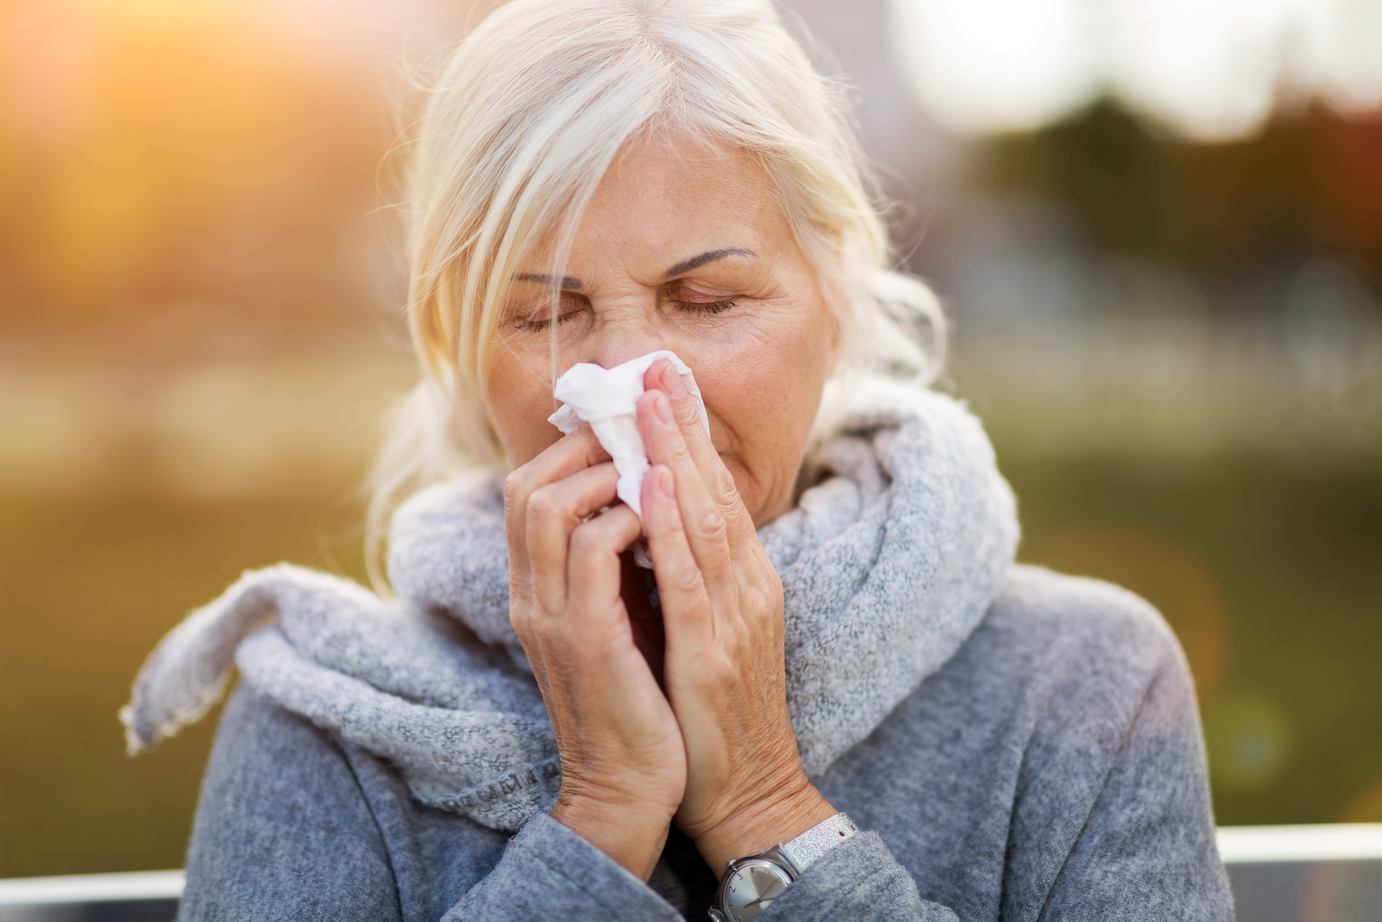 Senior woman sneezing into tissue while outdoors in fall